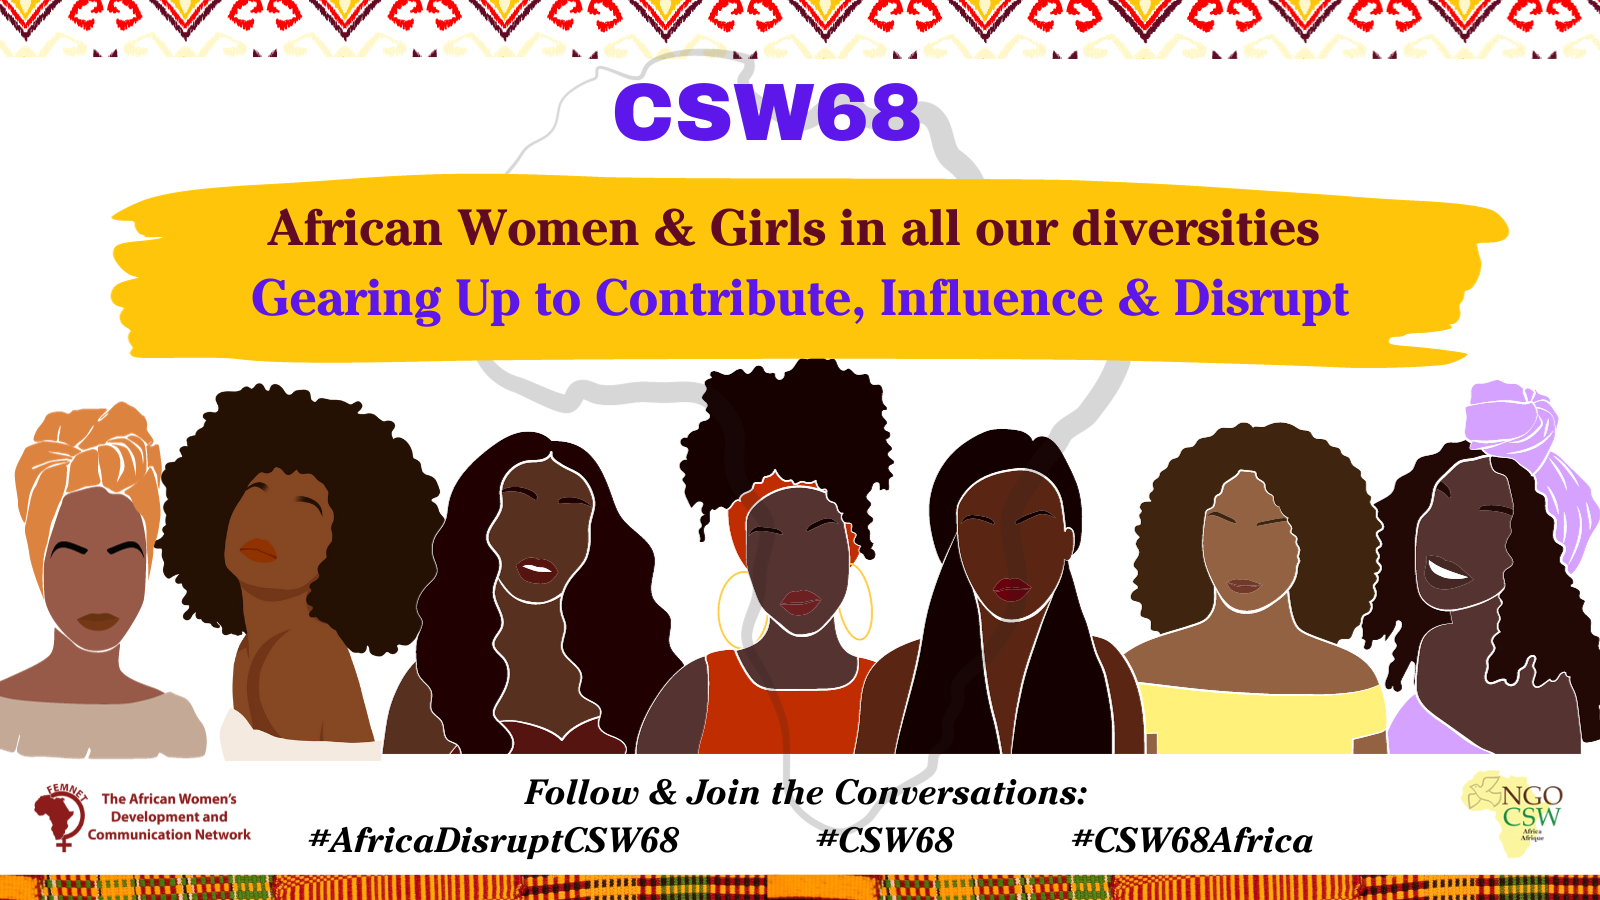 CSW68 Update 1: Ways to Engage, Contribute & Take Action